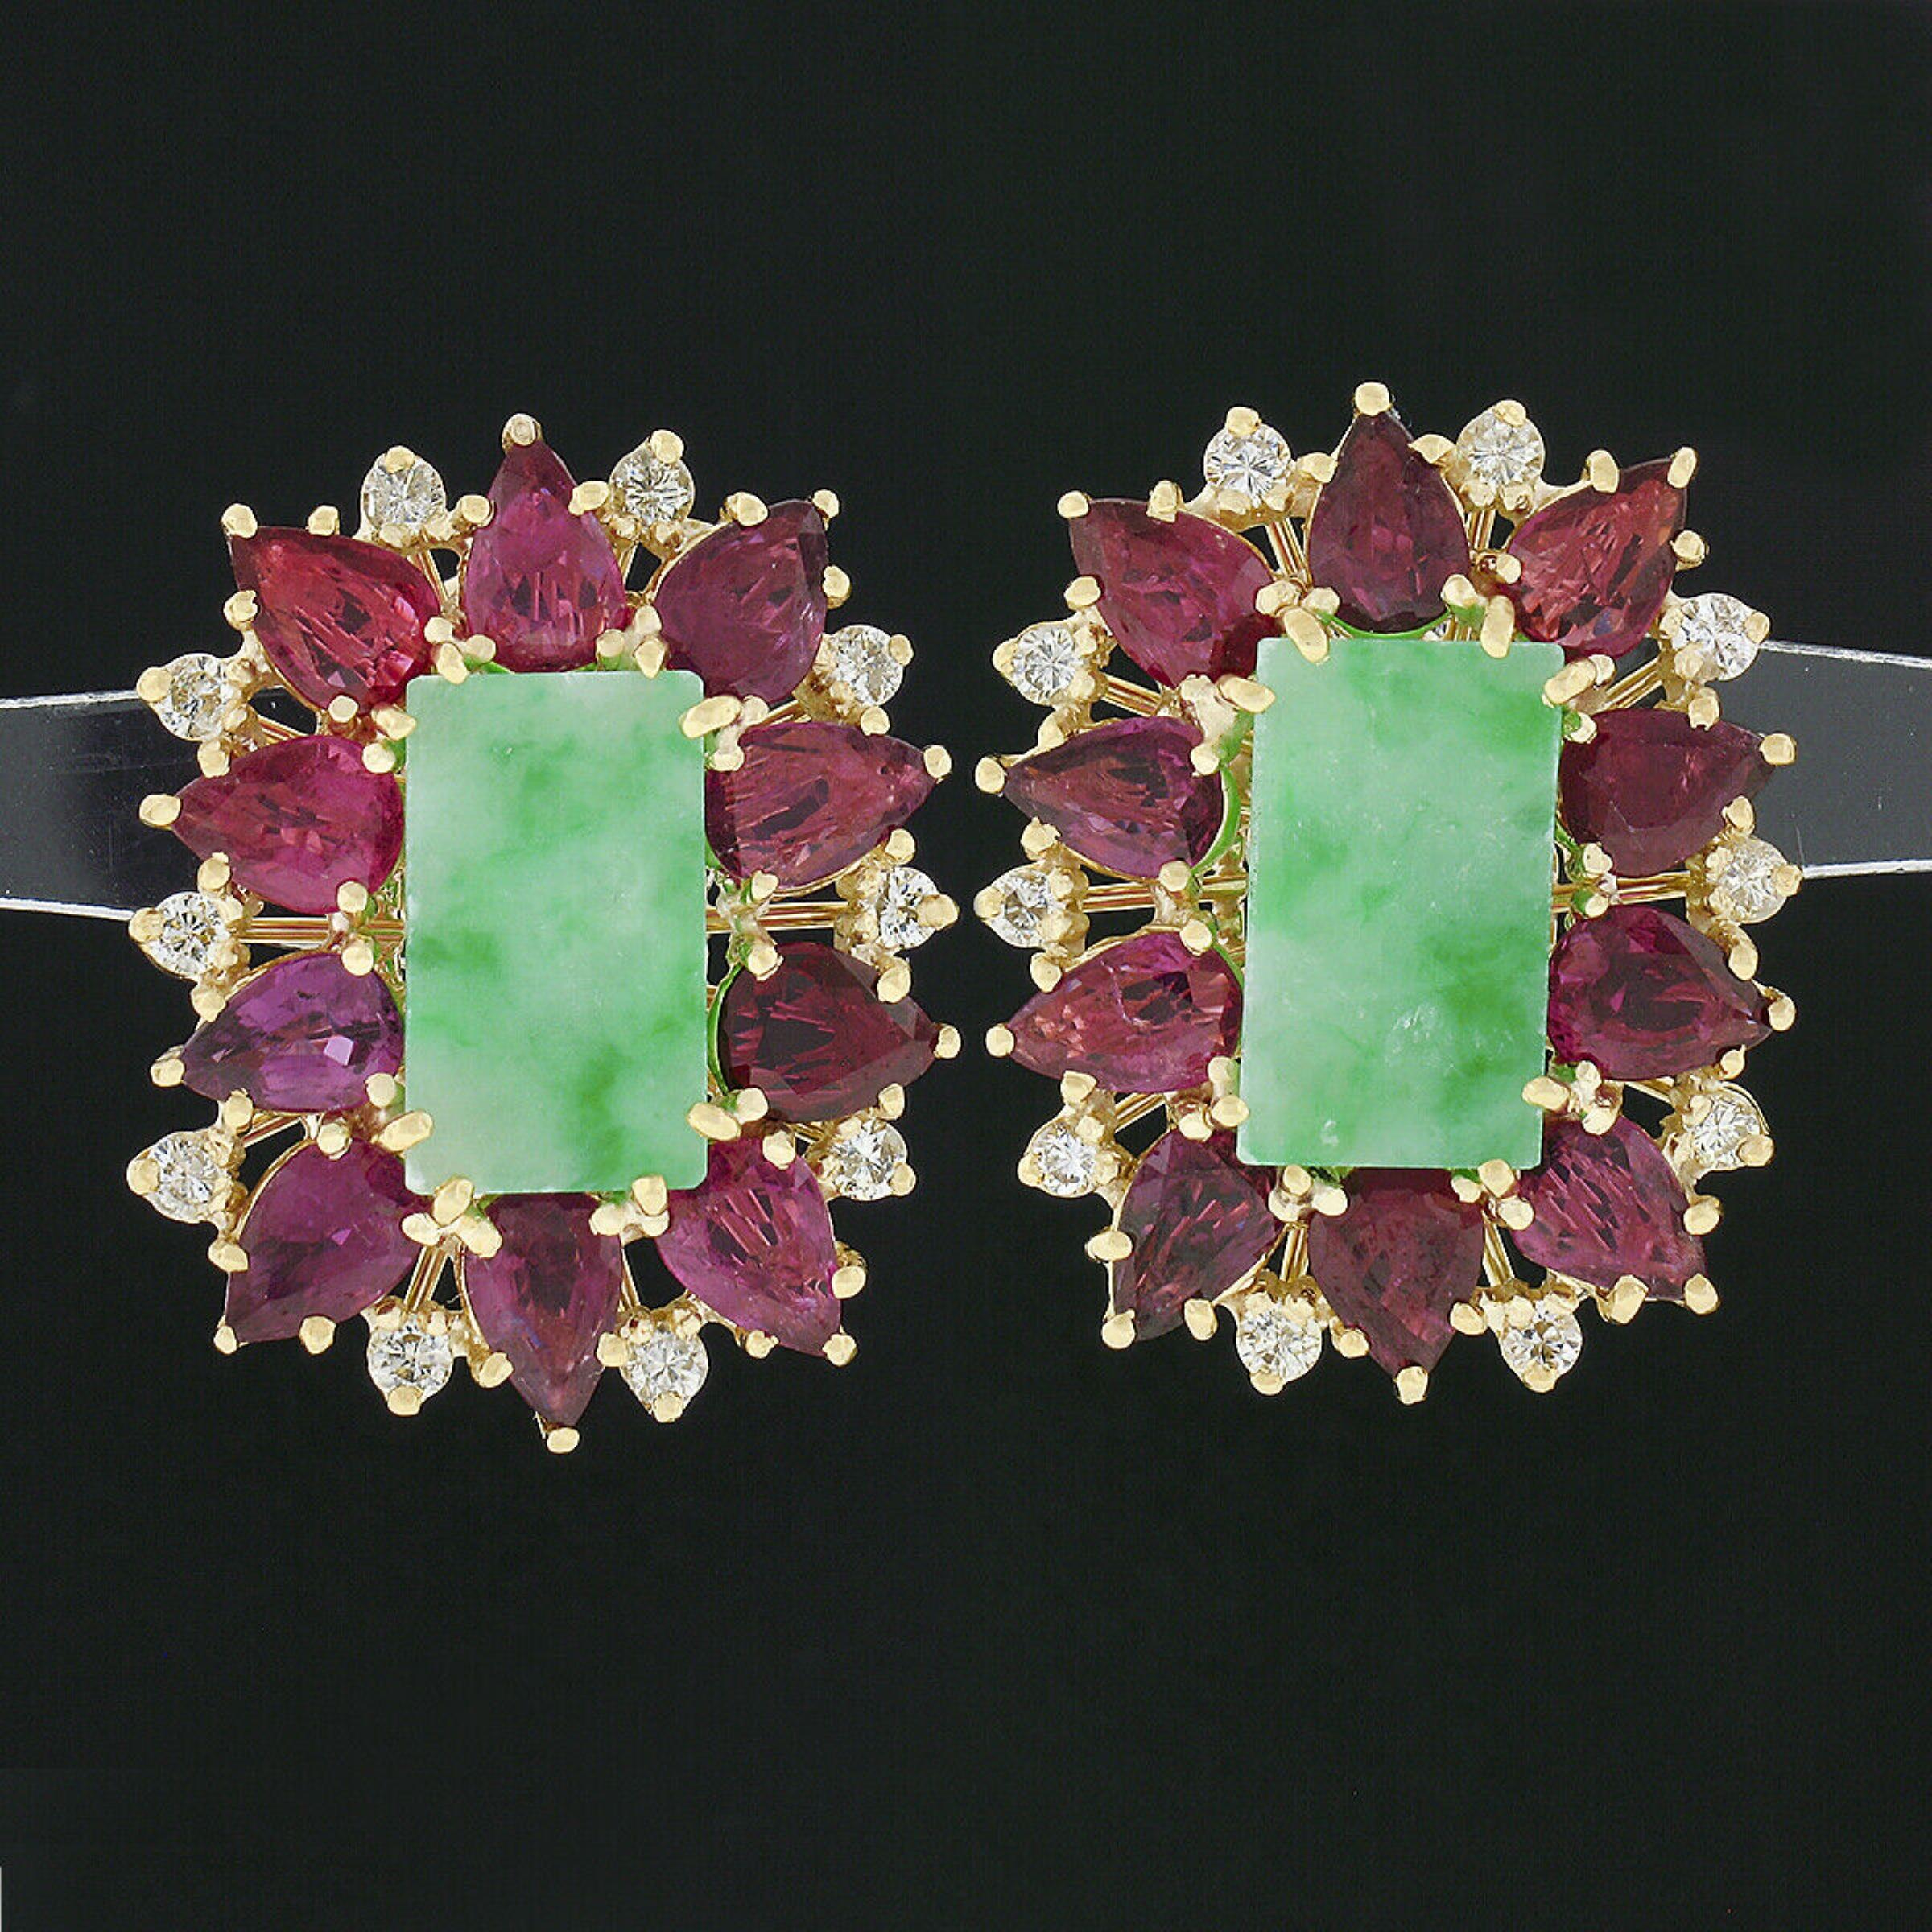 This breath-taking pair of vintage statement earrings is crafted in solid 18k yellow gold with each featuring a fine jade stone neatly set at their center surrounded by and absolutely stunning halo of rubies and diamonds throughout. The beautiful